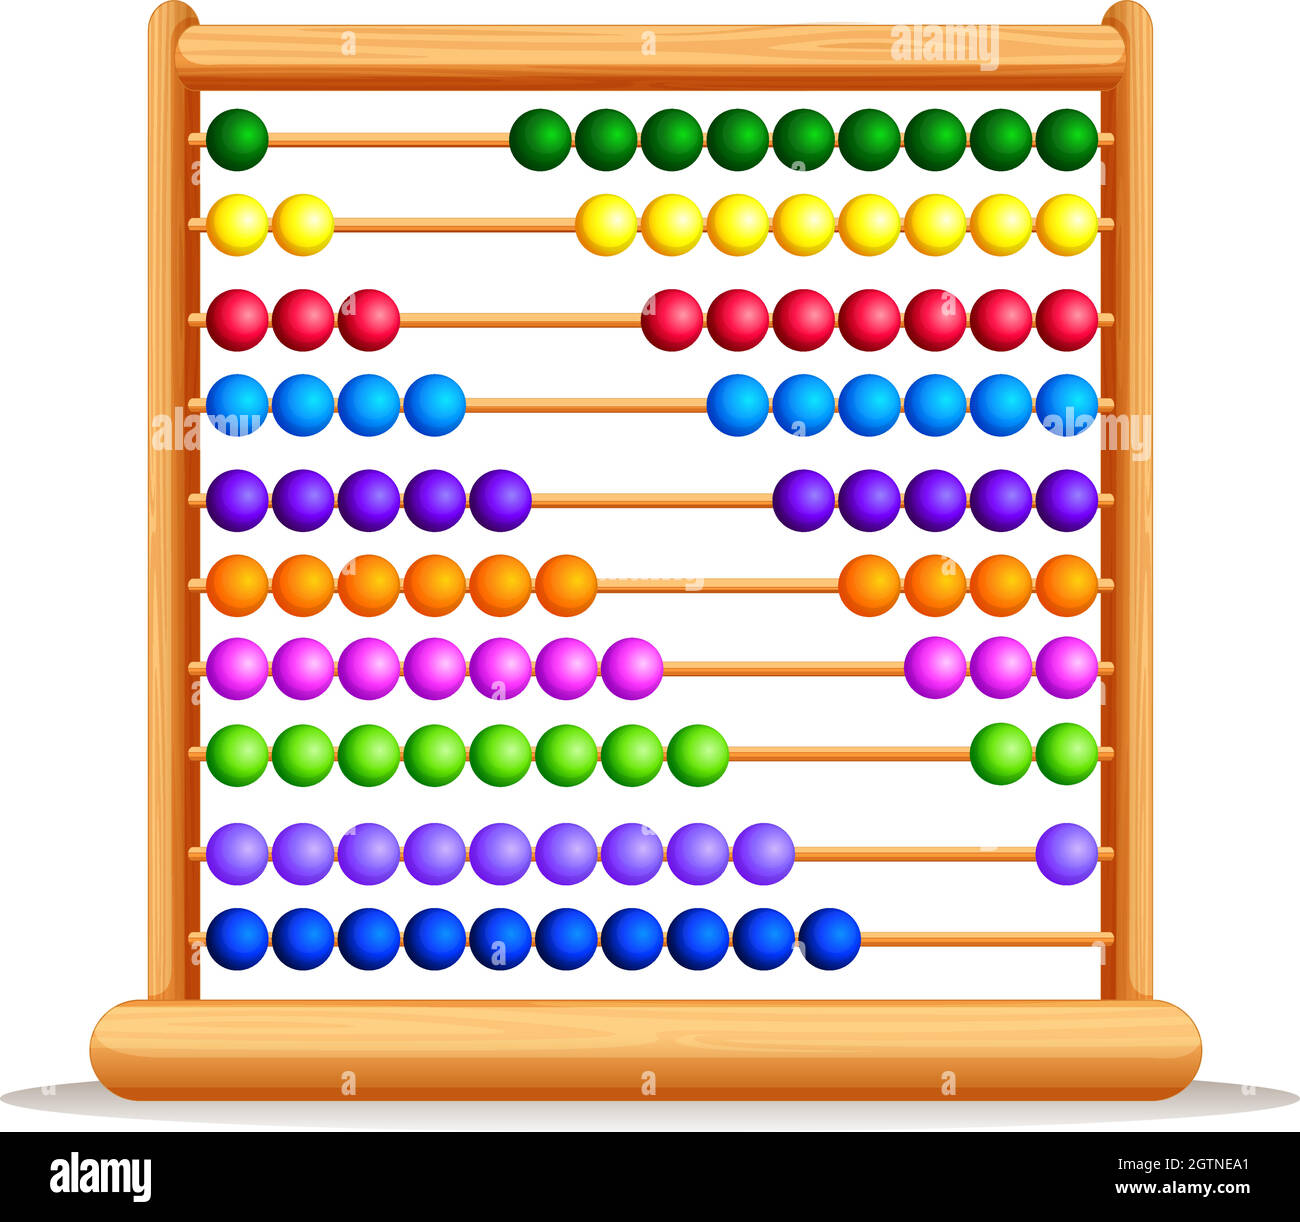 Colorful abacus with wooden frame Stock Vector